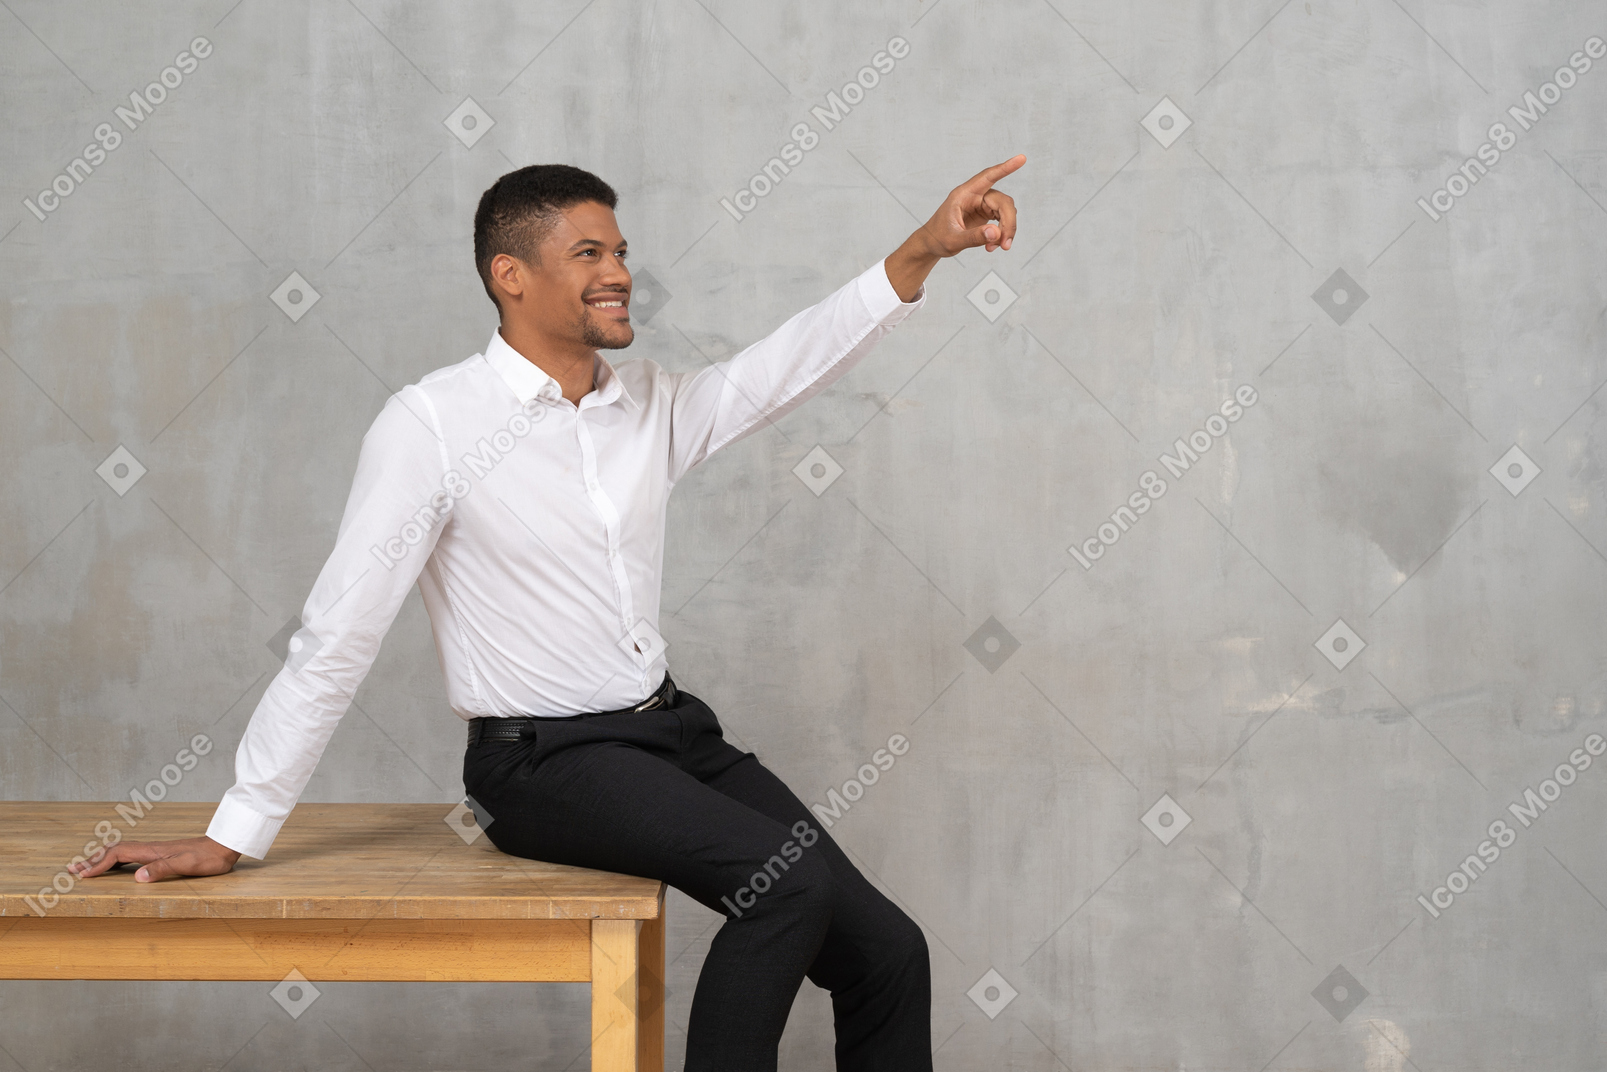 Smiling man in office clothes sitting on a table and pointing up